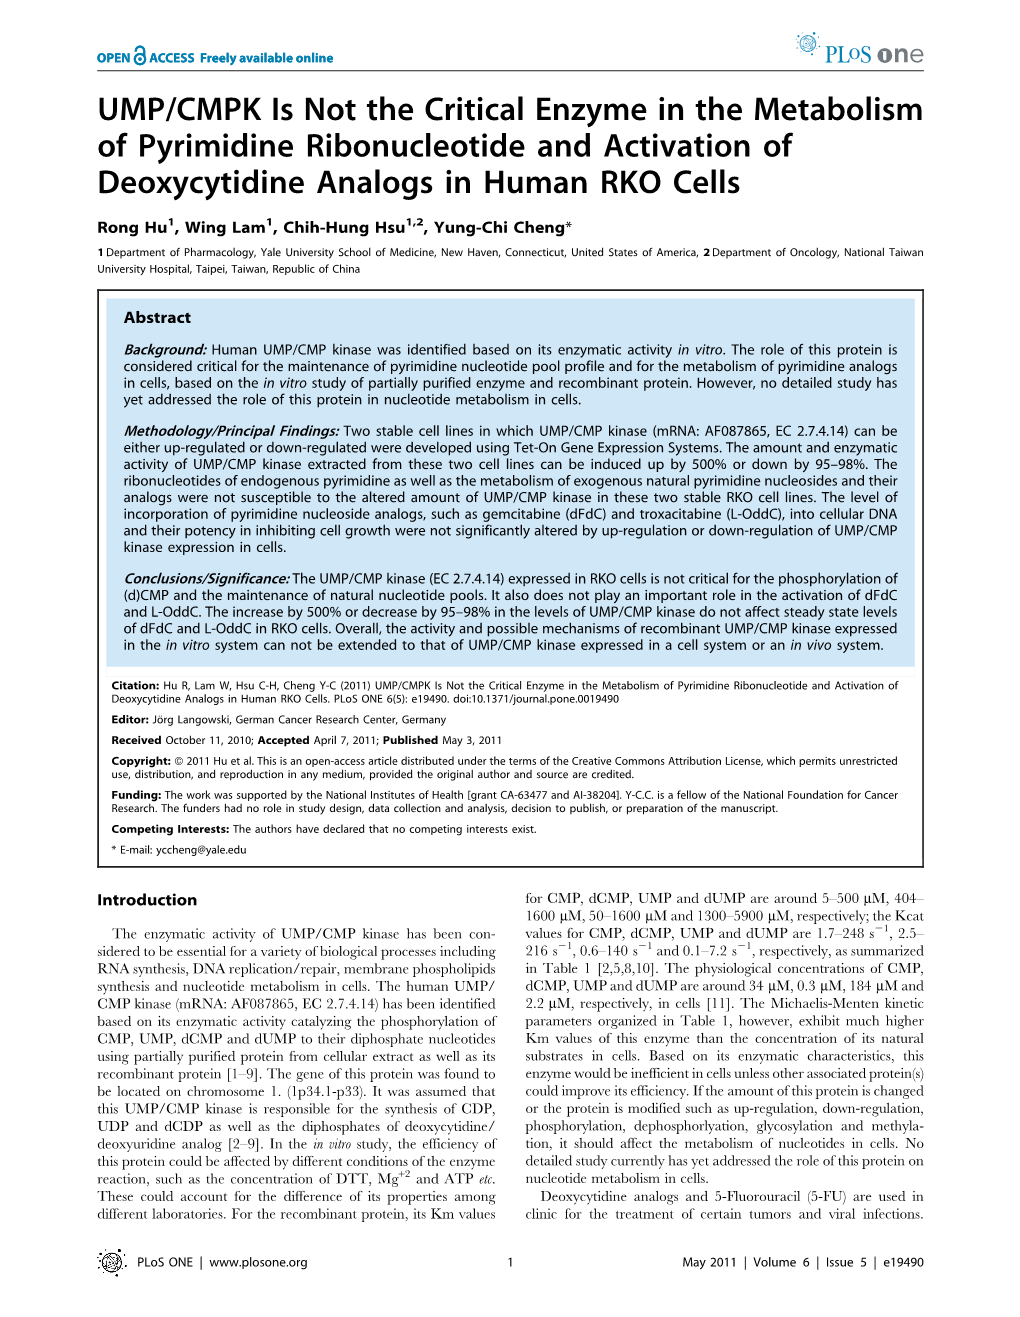 UMP/CMPK Is Not the Critical Enzyme in the Metabolism of Pyrimidine Ribonucleotide and Activation of Deoxycytidine Analogs in Human RKO Cells